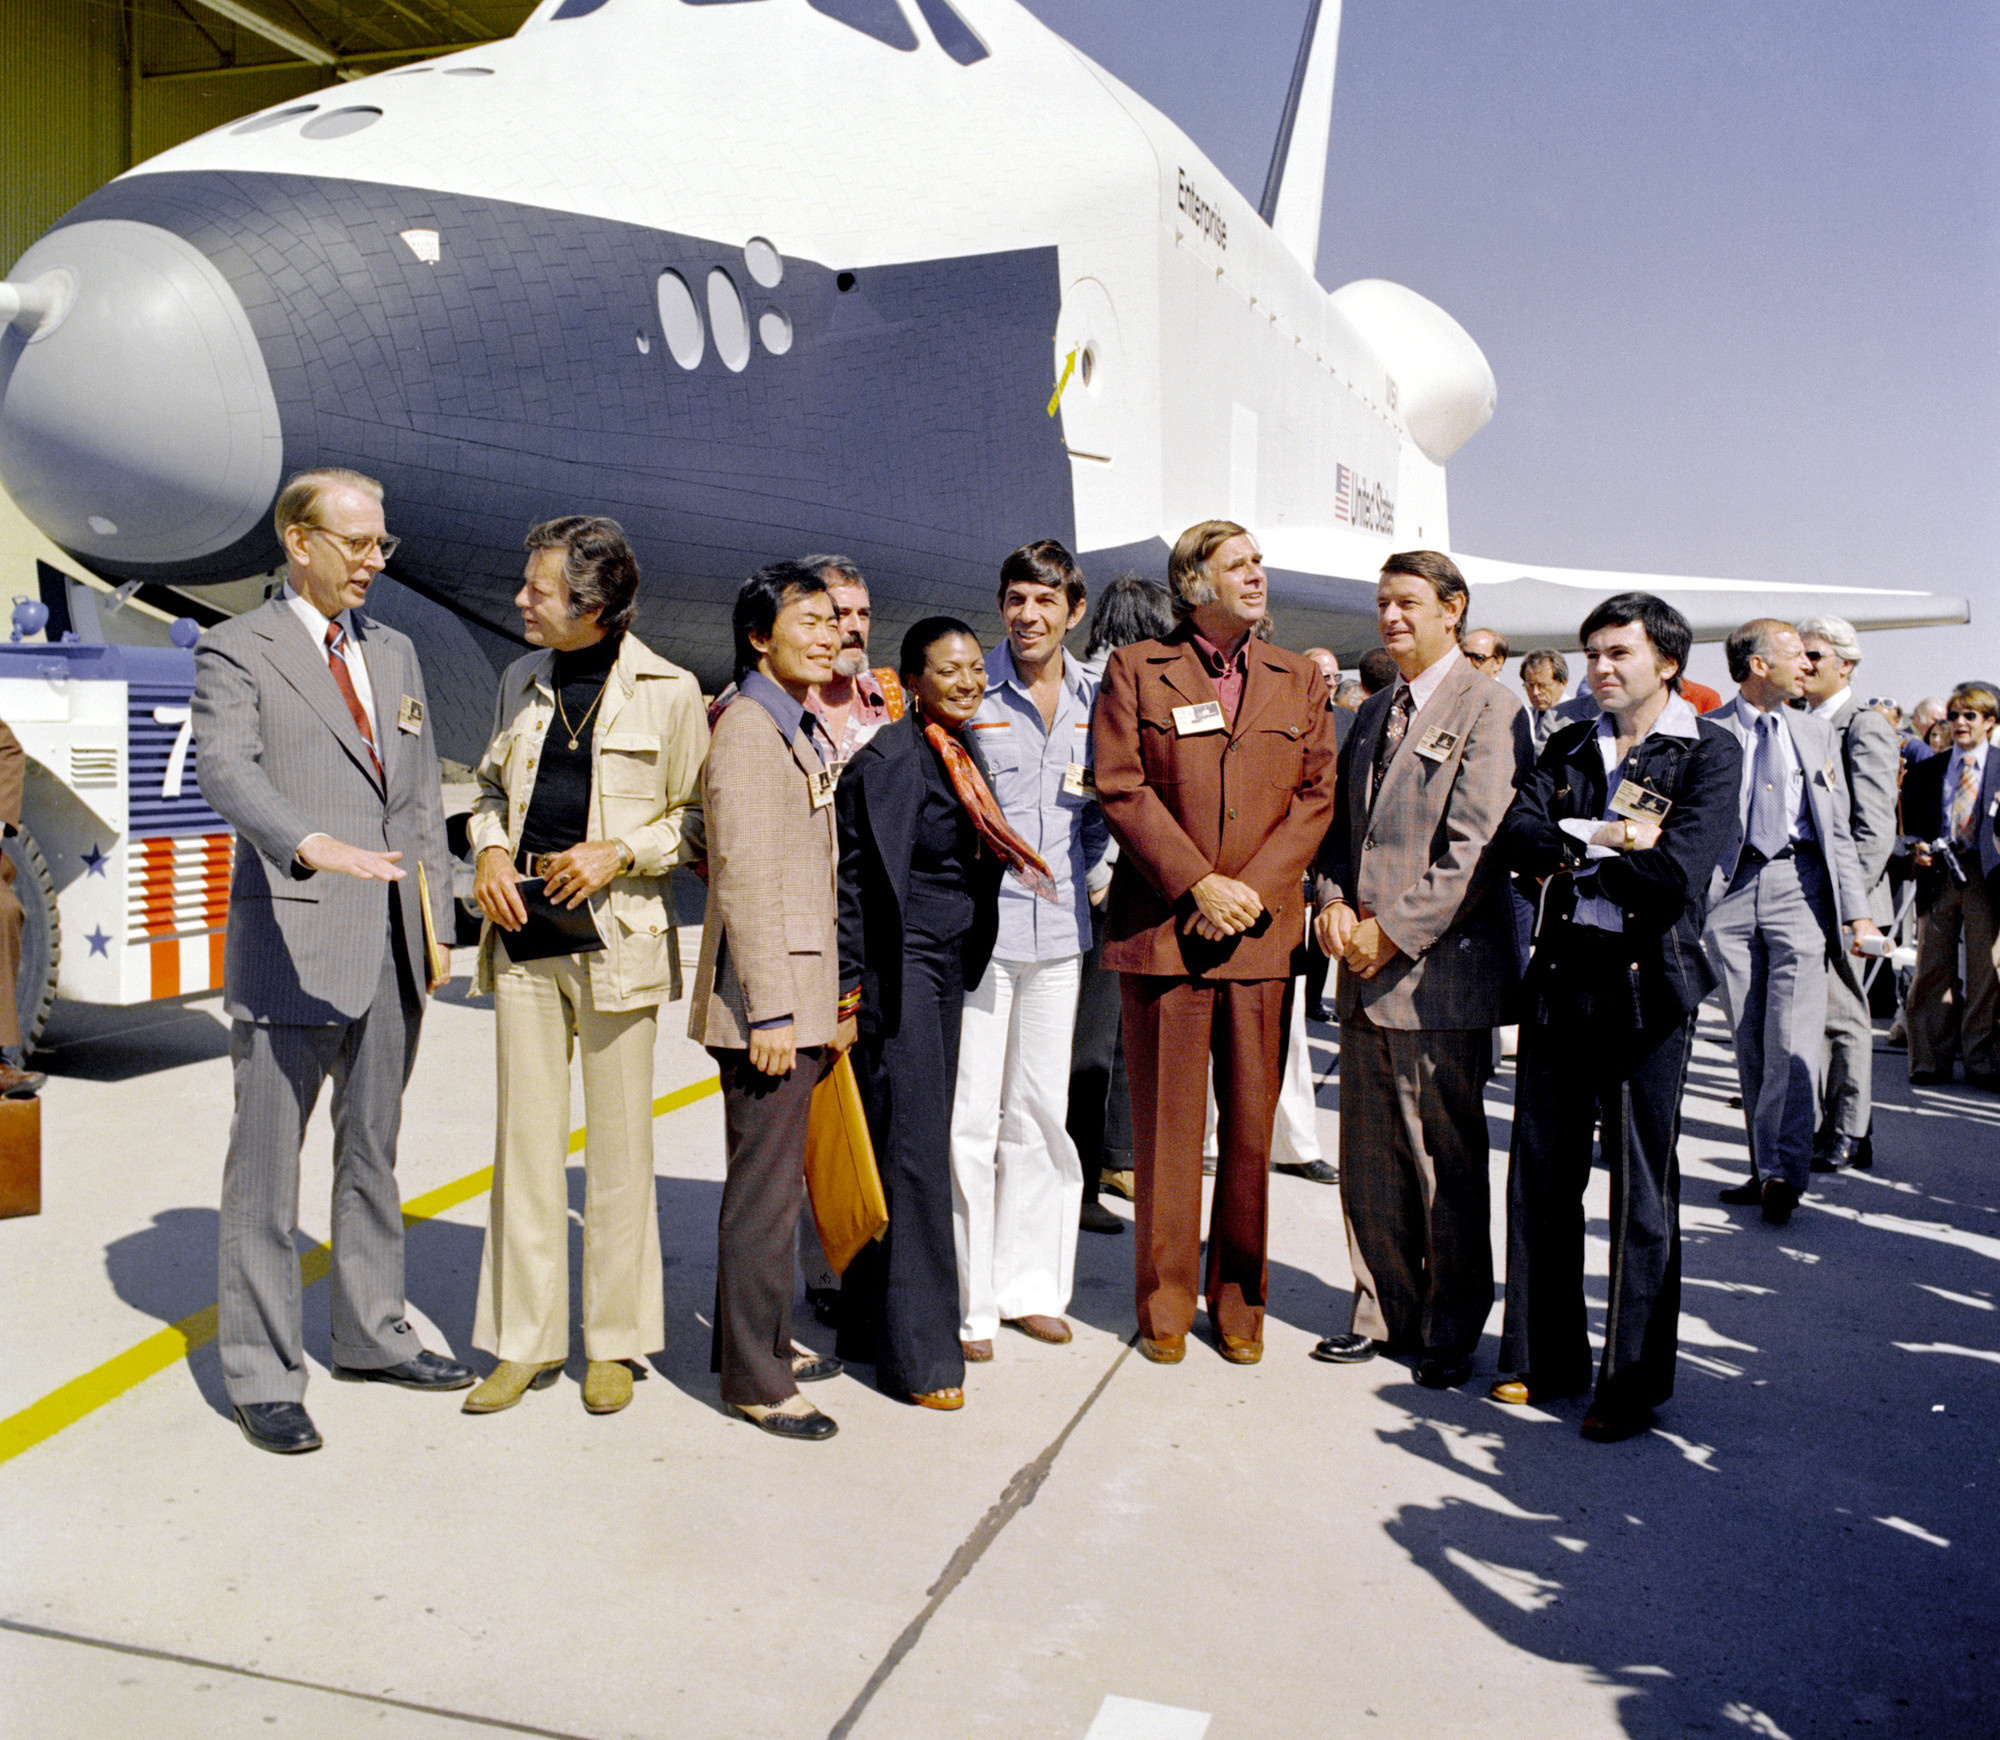 The Star Trek cast with the Space Shuttle Enterprise in 1976.